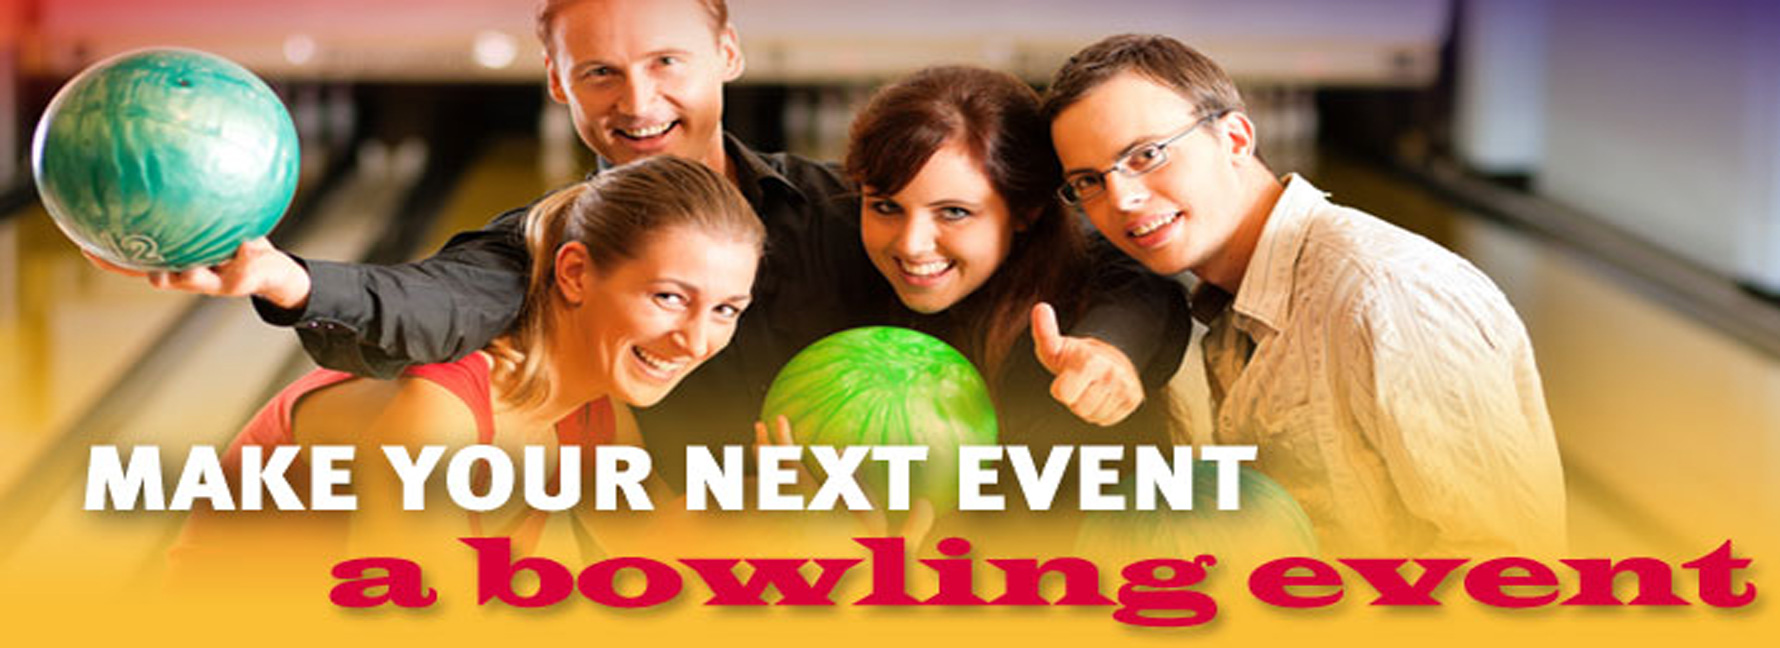 Bowling Party Event